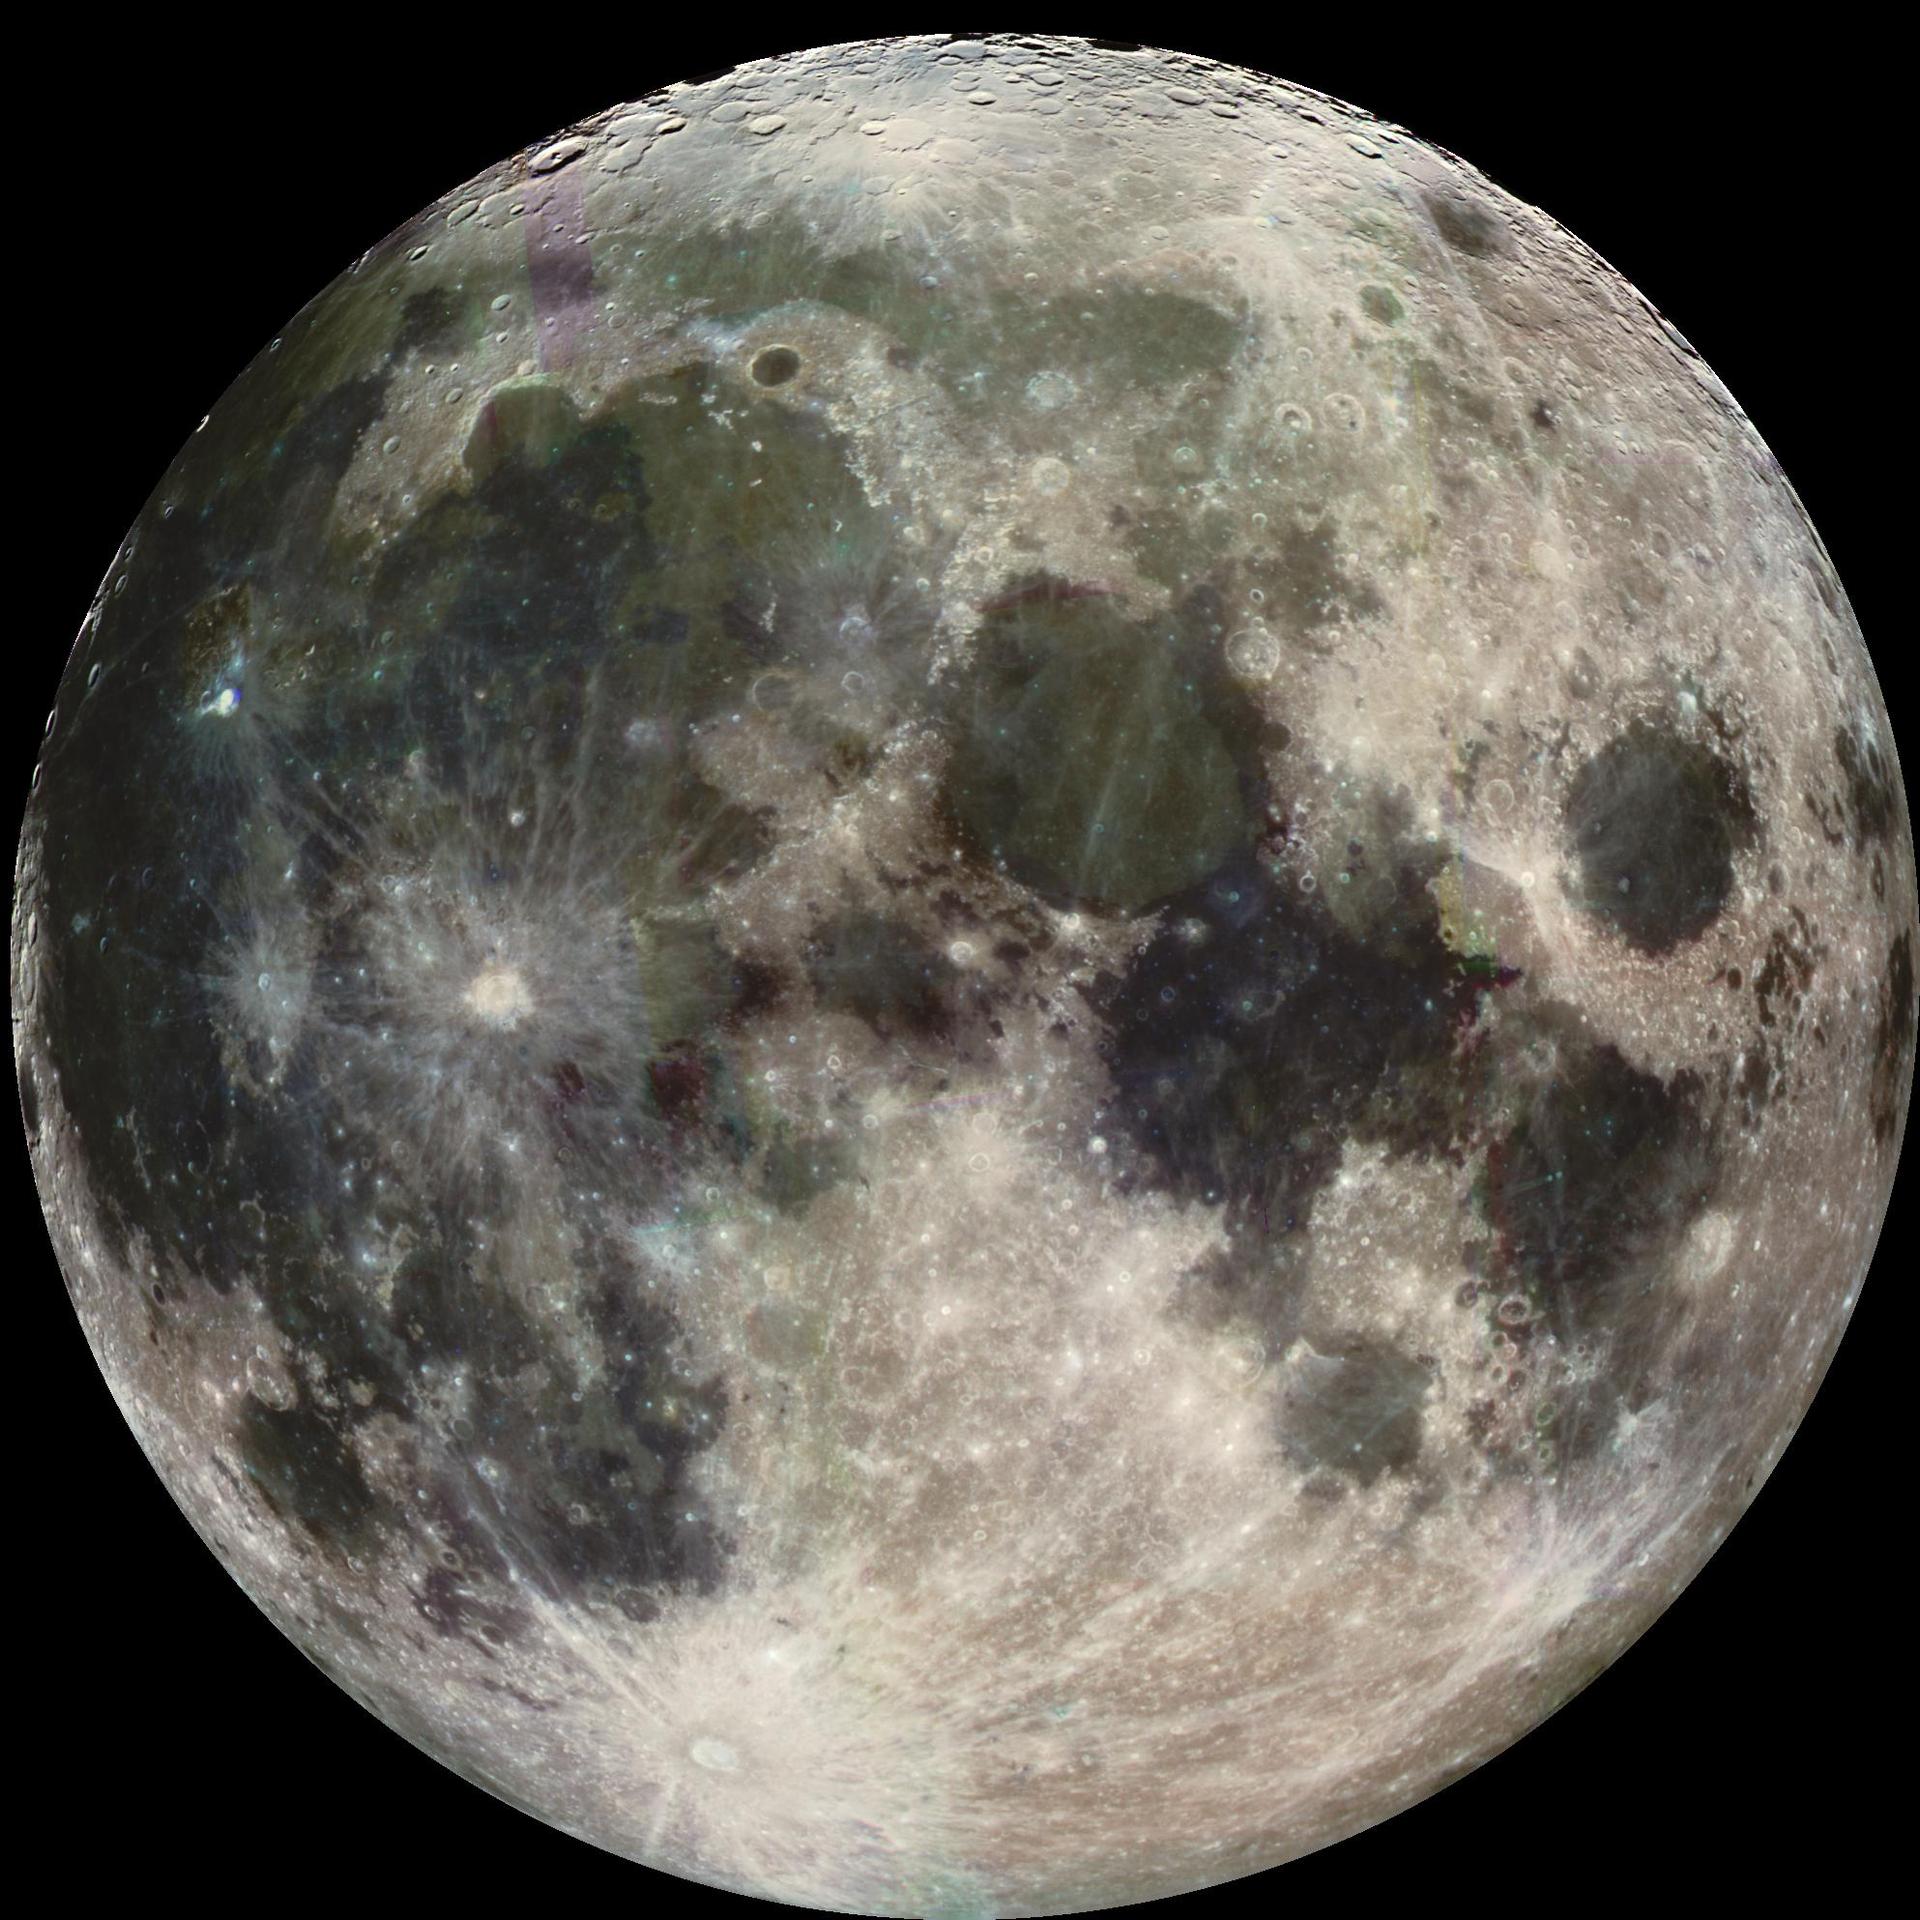 The Moon as seen by Nasa’s Galileo spacecraft